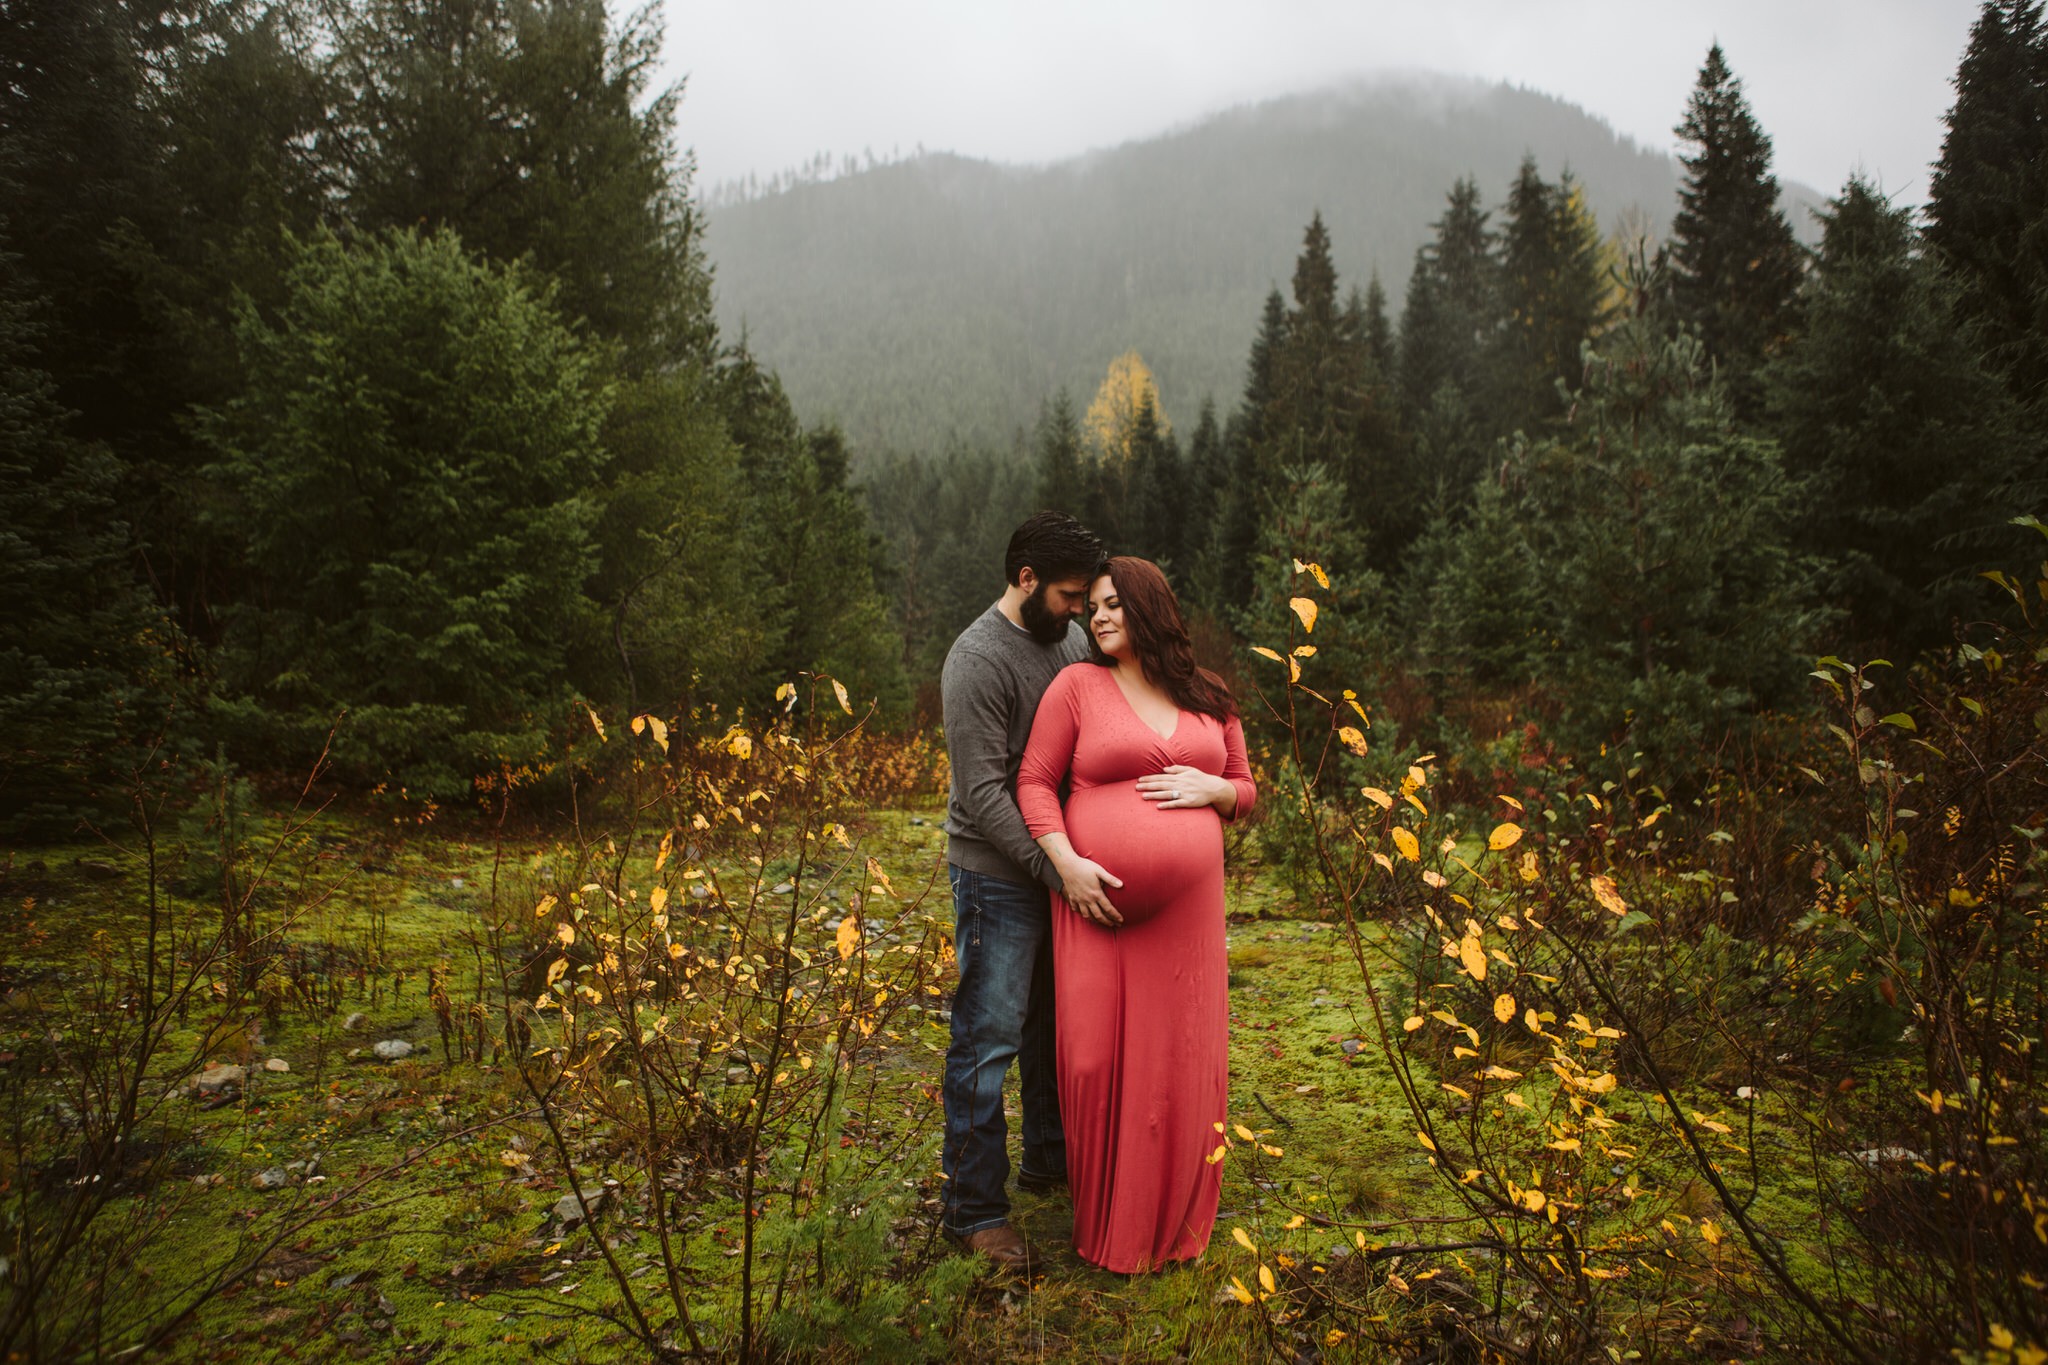 GW1 8506 Seattle and Snohomish Wedding and Engagement Photography by GSquared Weddings Photography